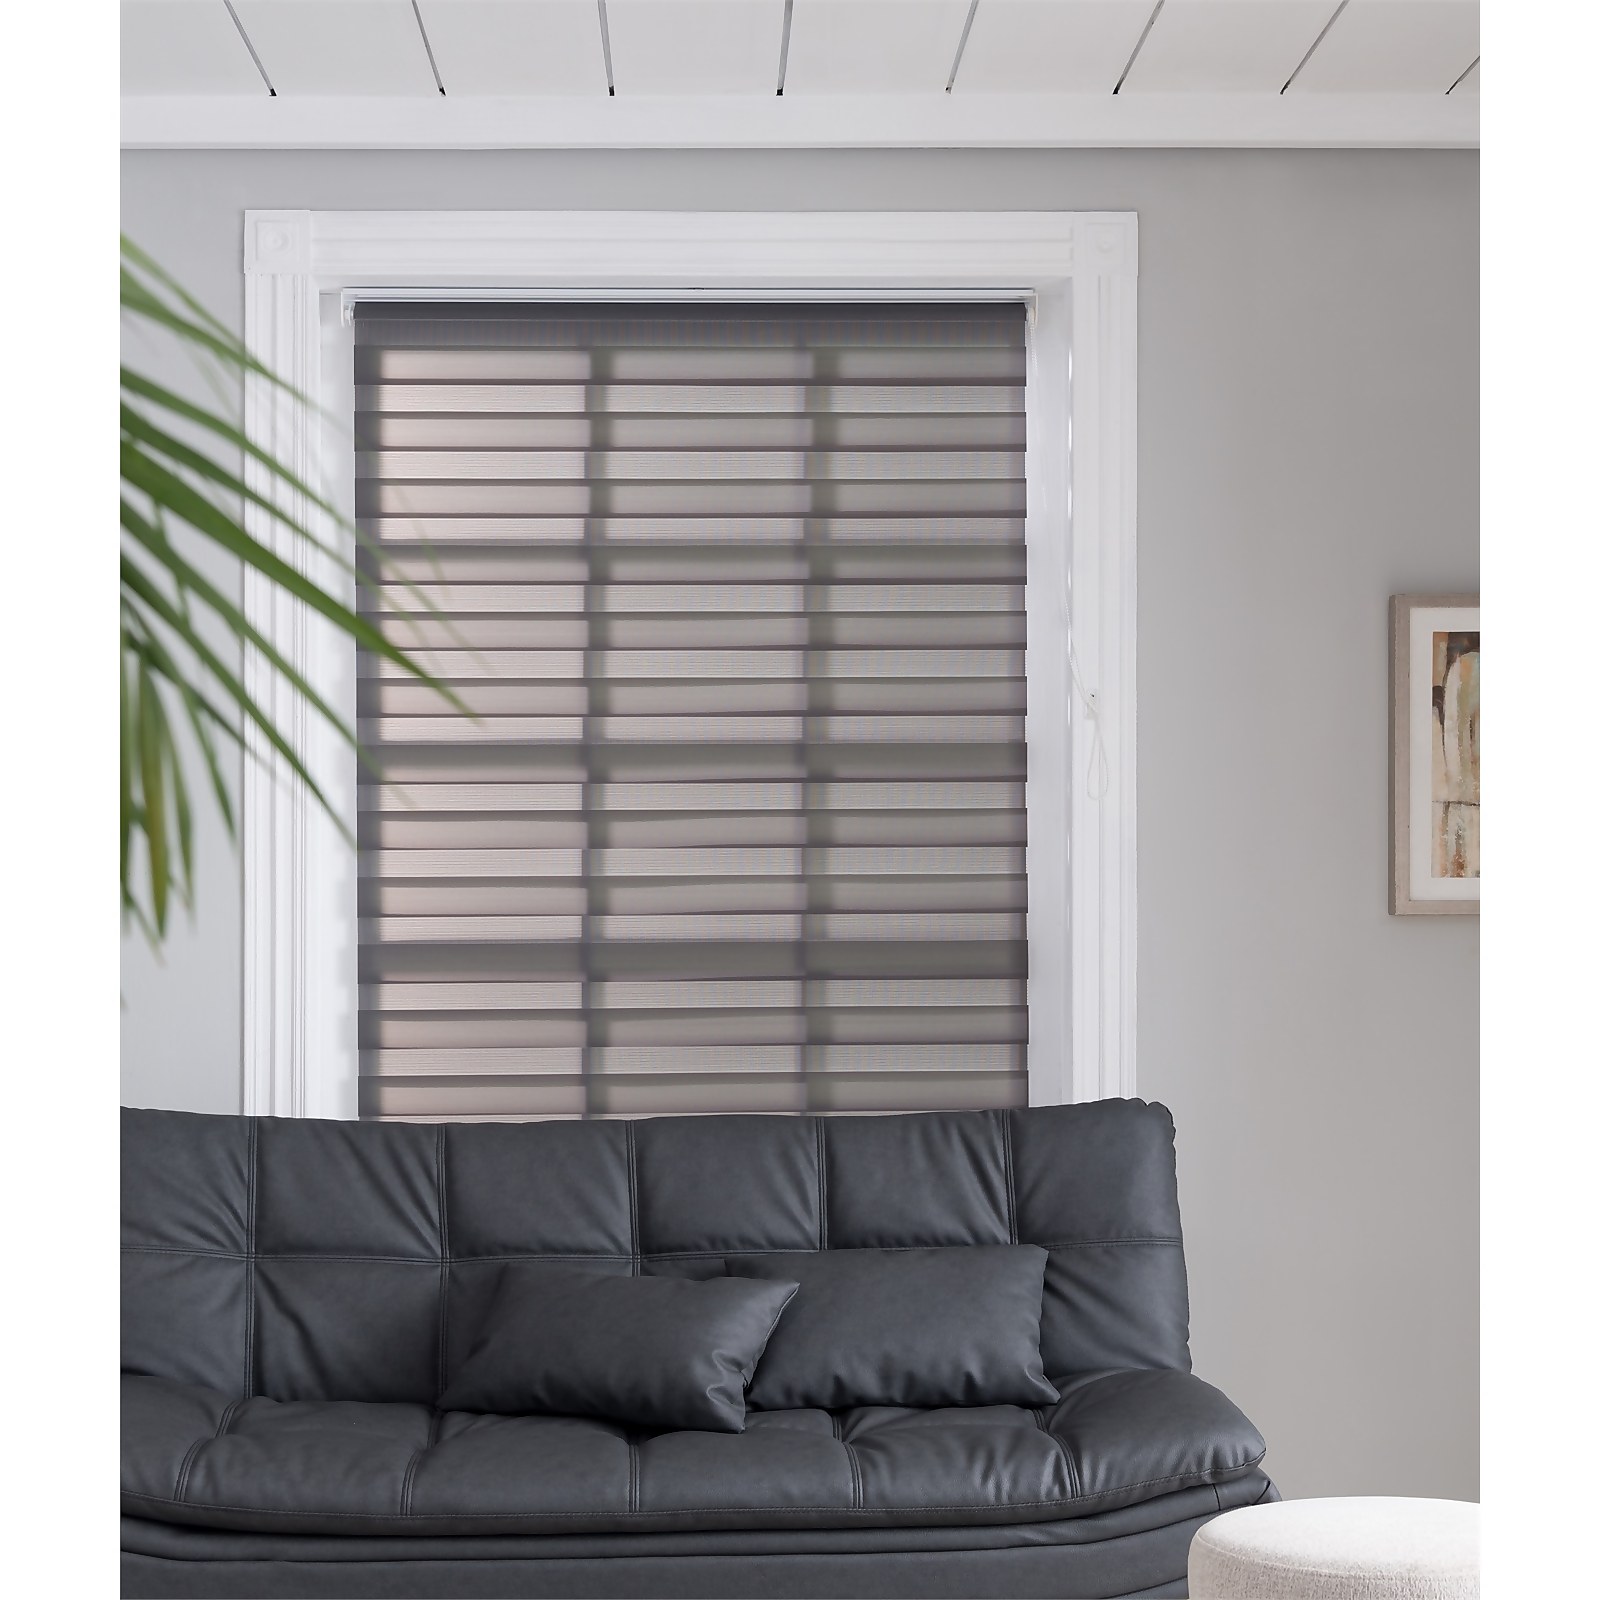 Photo of Night & Day Roller Blind - Dove Grey - 120x160cm